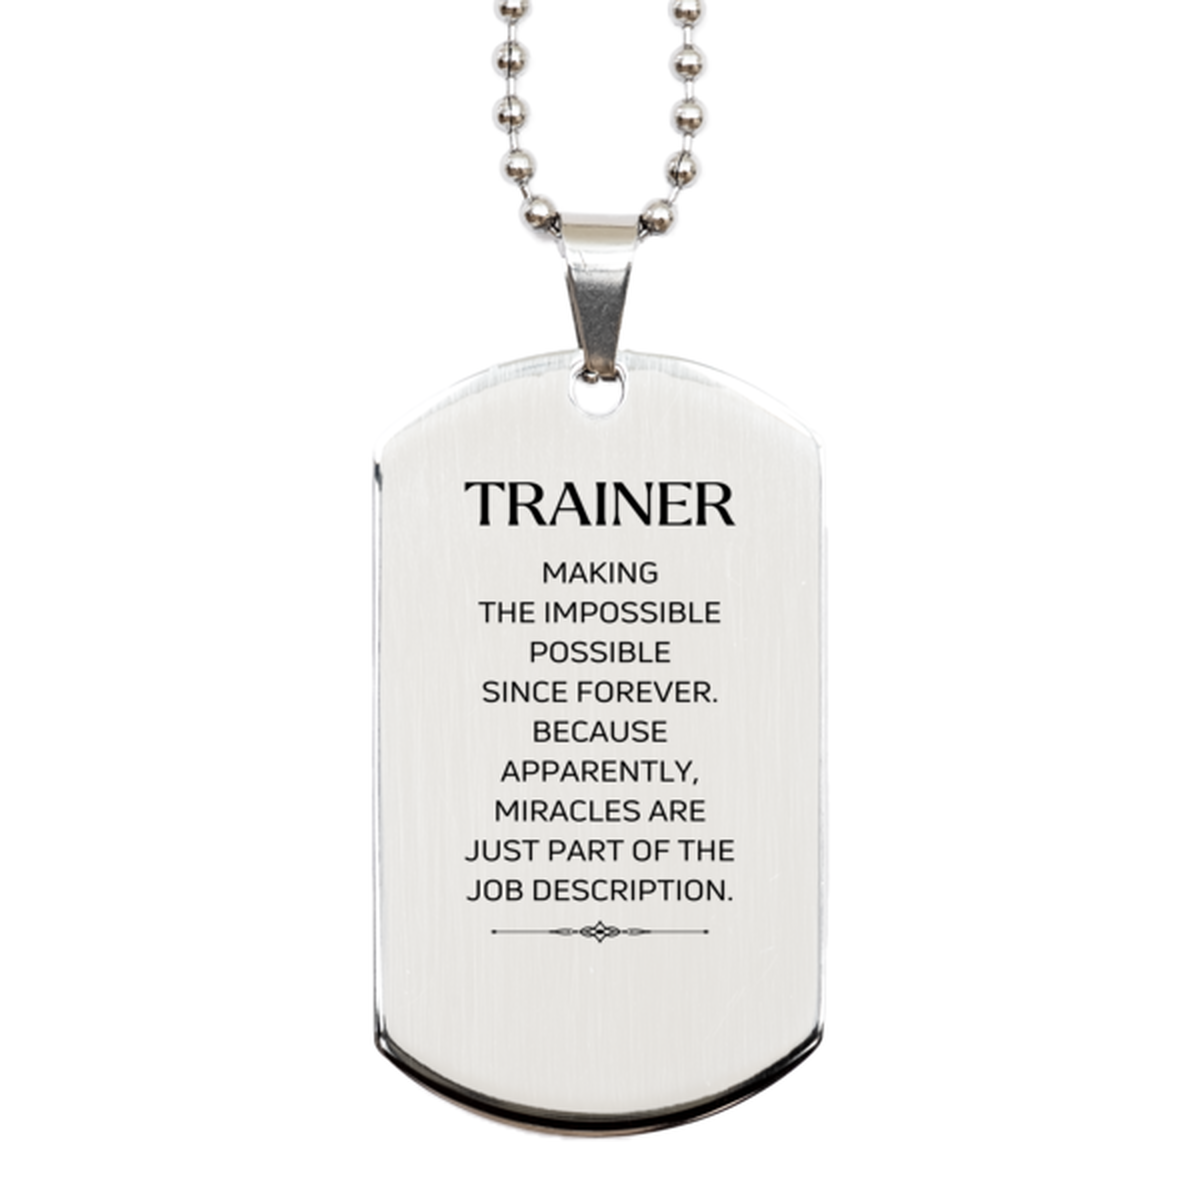 Funny Trainer Gifts, Miracles are just part of the job description, Inspirational Birthday Silver Dog Tag For Trainer, Men, Women, Coworkers, Friends, Boss